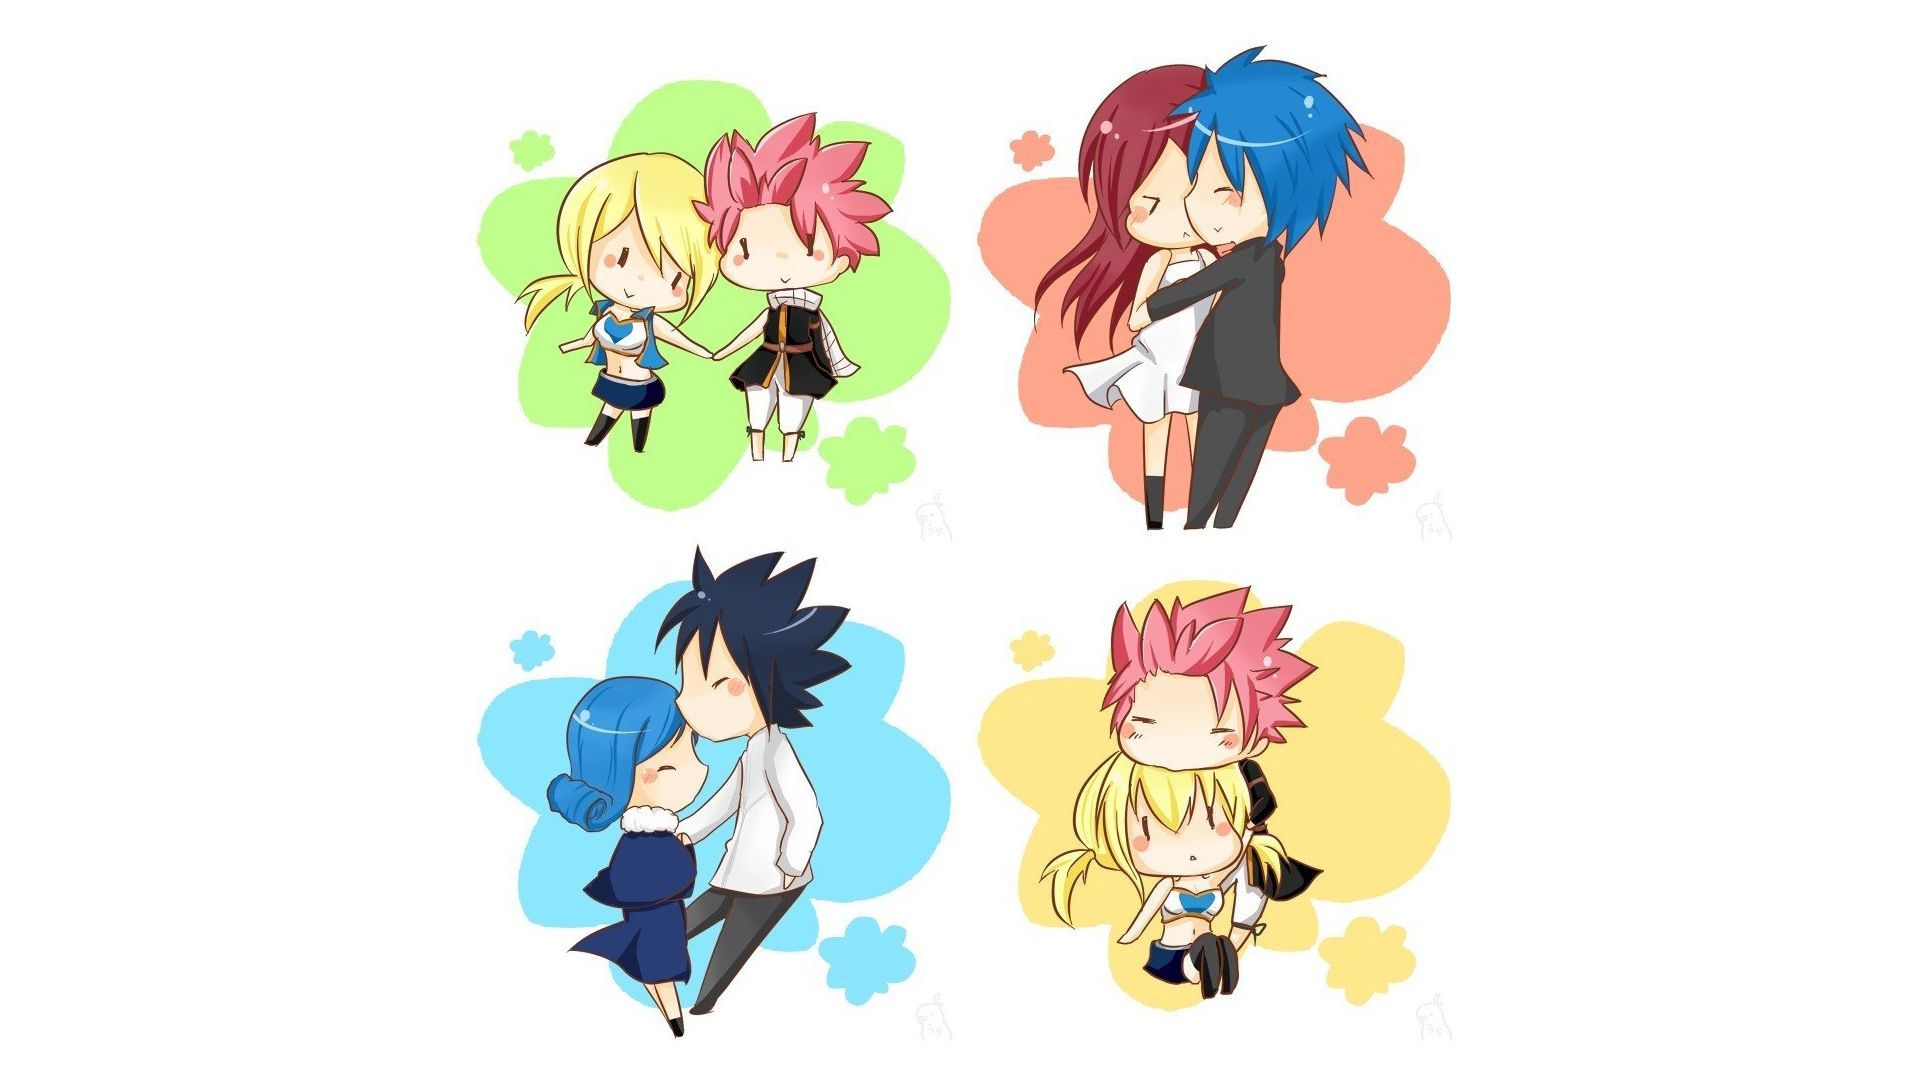 Fairy Tail HD Wallpapers